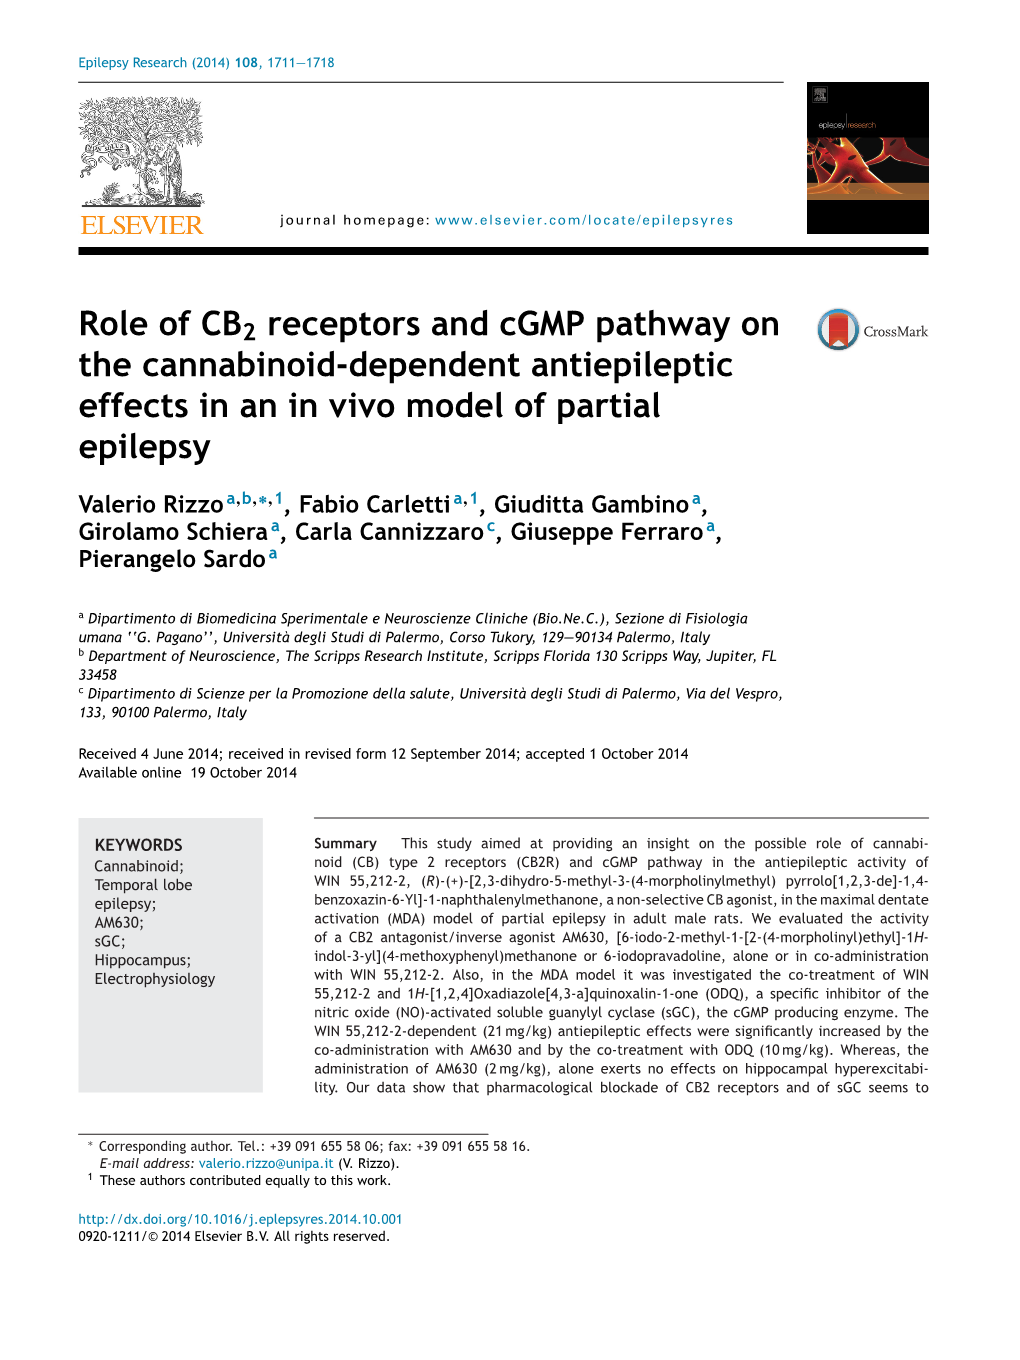 Role of CB2 Receptors and Cgmp Pathway on the Cannabinoid-Dependent Antiepileptic Effects in an in Vivo Model of Partial Epileps